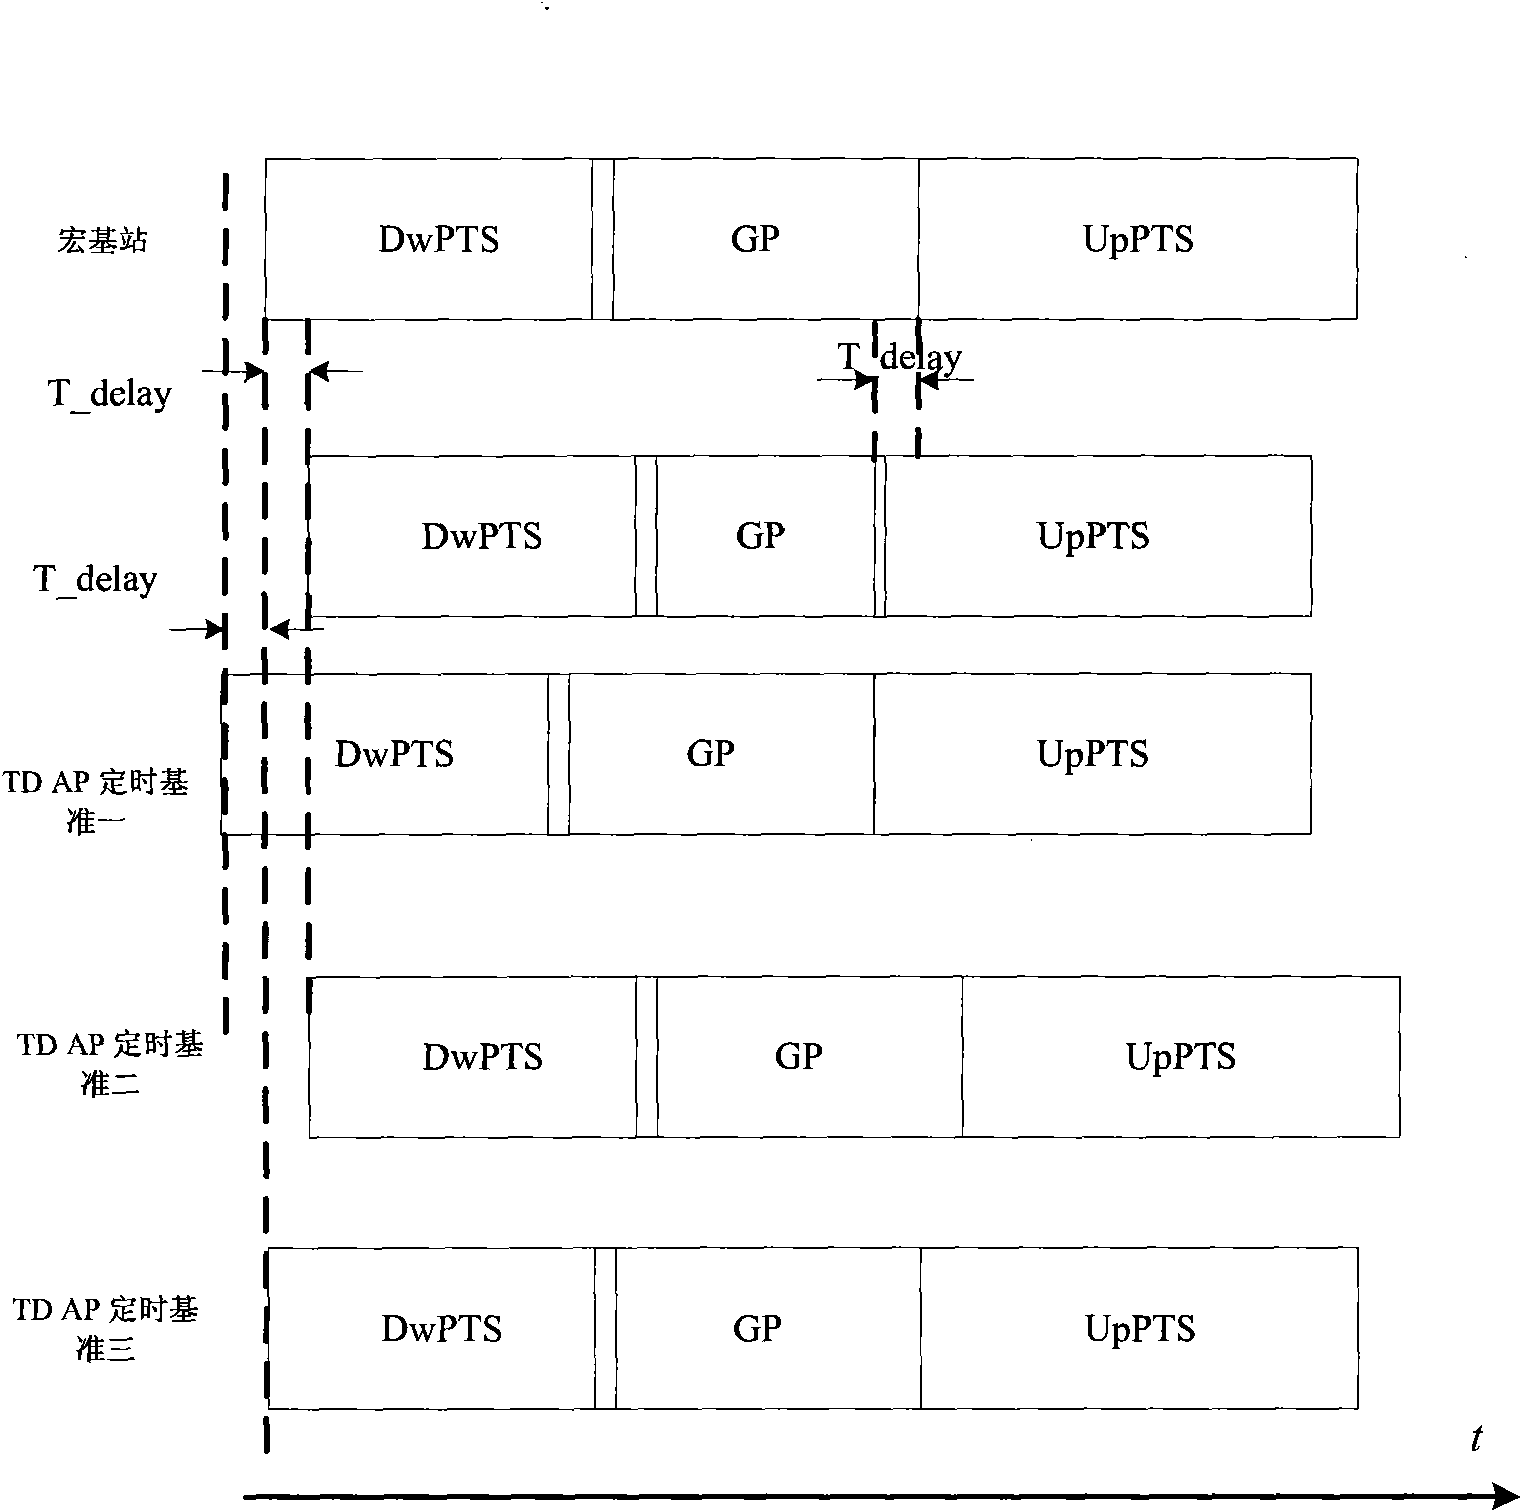 Air interface synchronizing method between Femto device and macro station